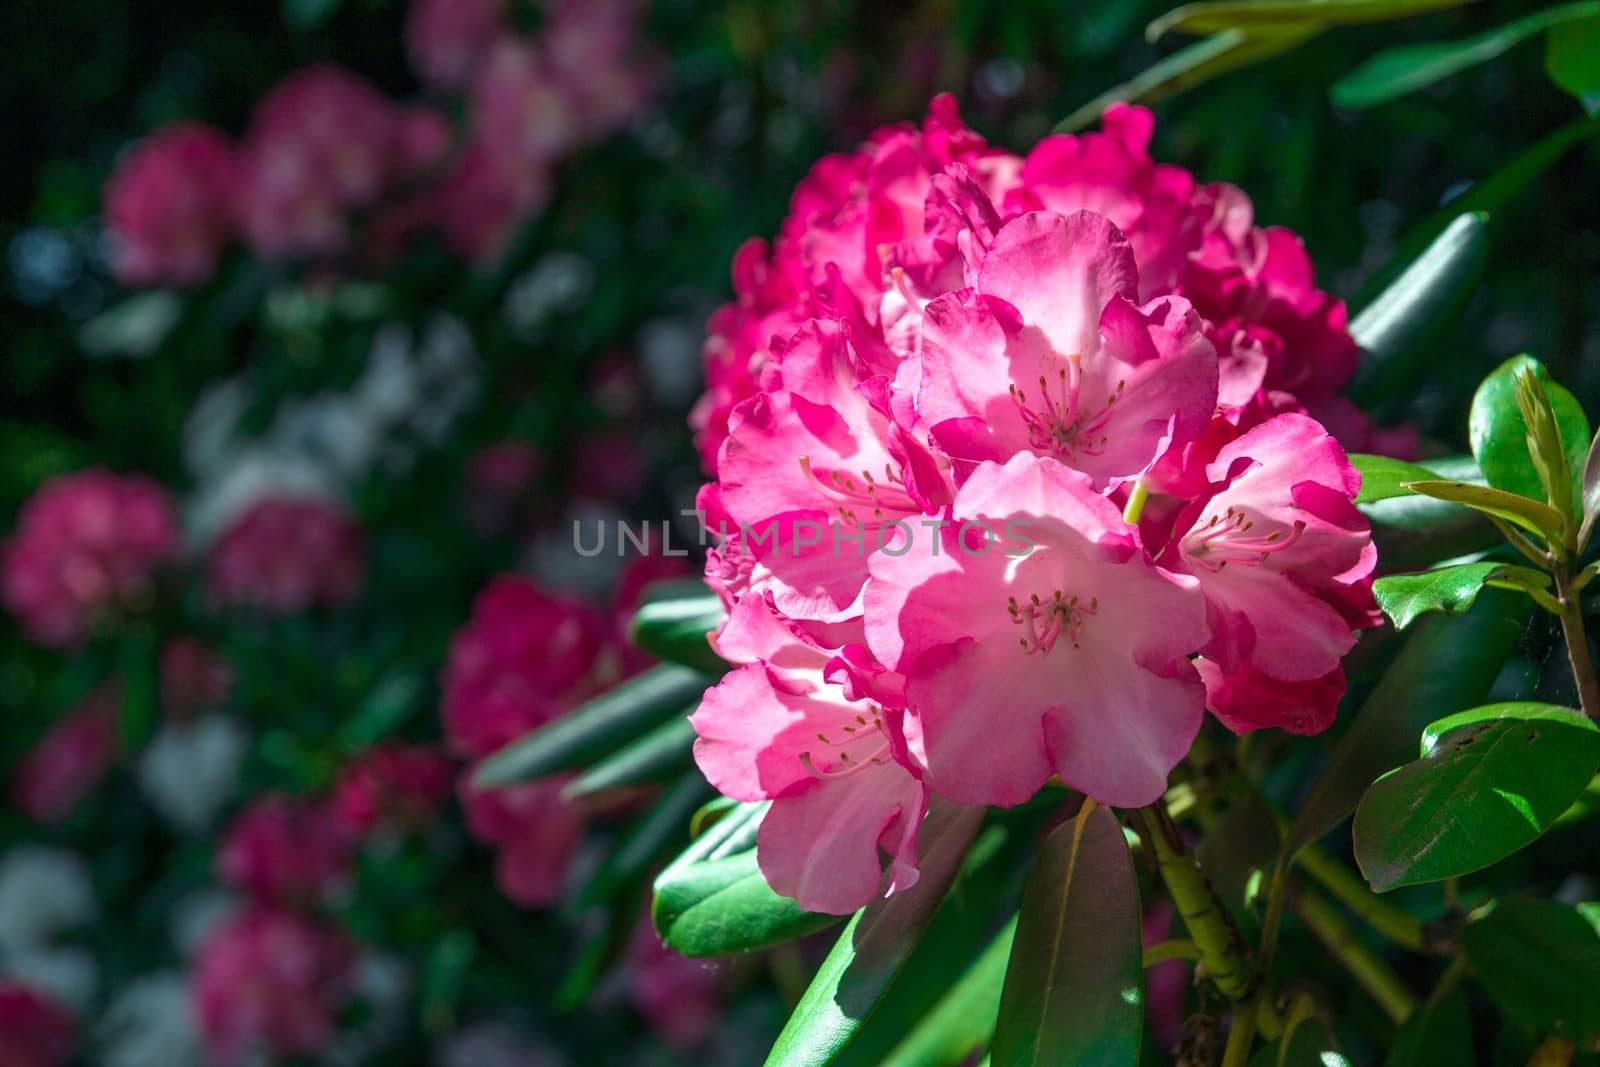 Rhododendron close-up, selective focus by simpson33